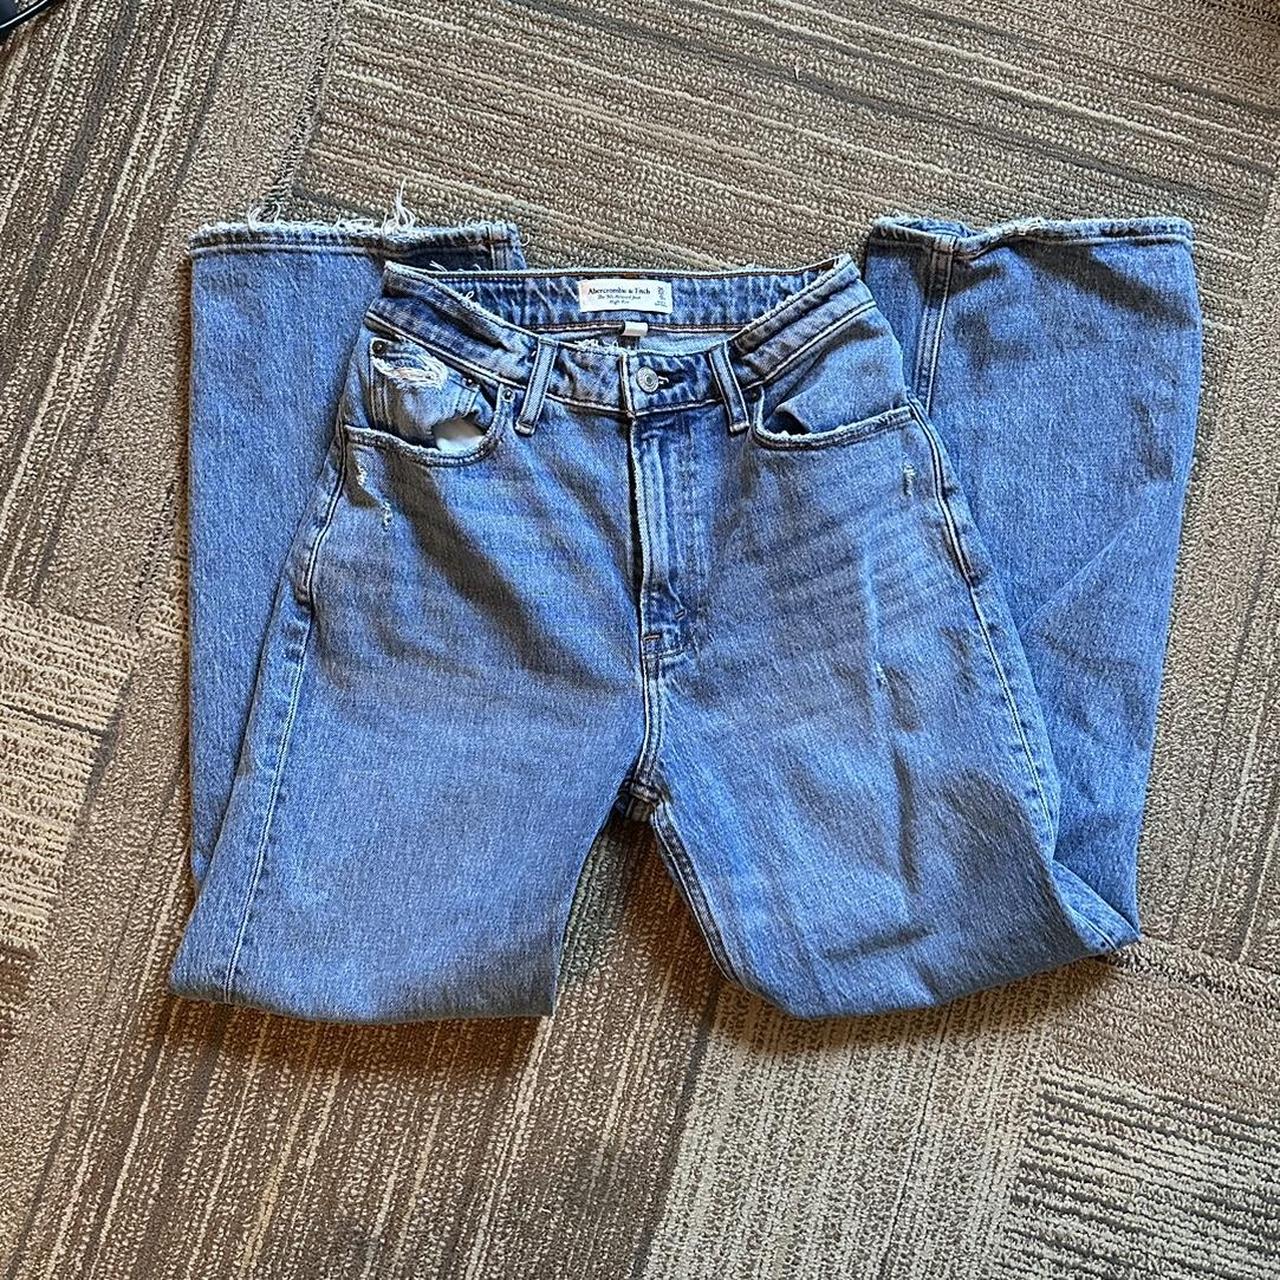 A&F 90s relaxed jeans curve love High rise size 25... - Depop